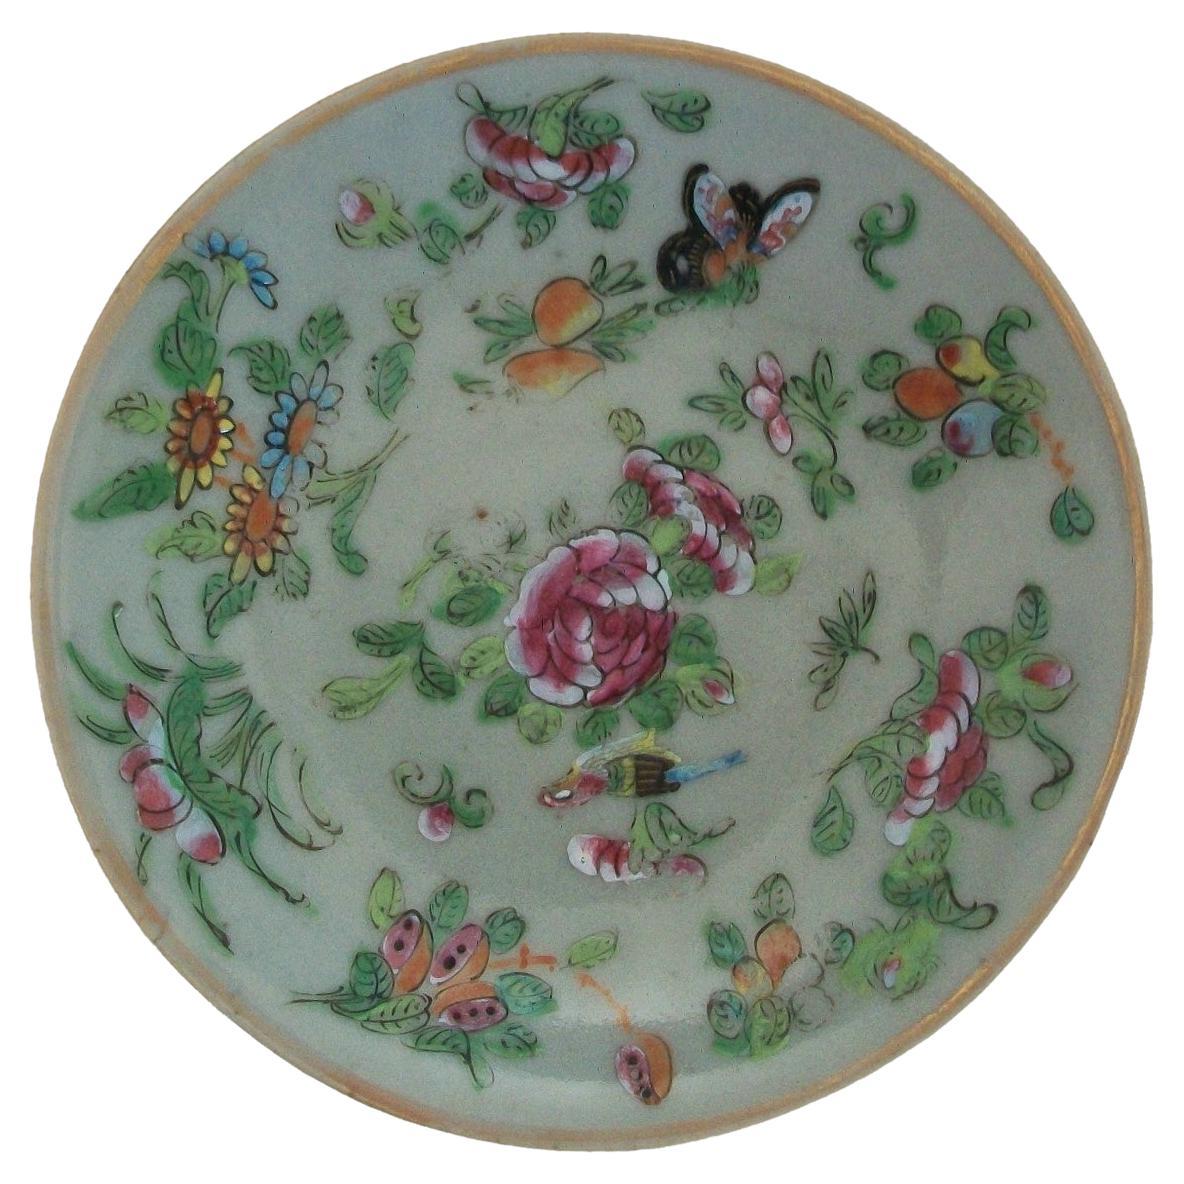 Qing Chinese Export Celadon 'Famille Rose' Plate, Square Seal Mark, circa 1820